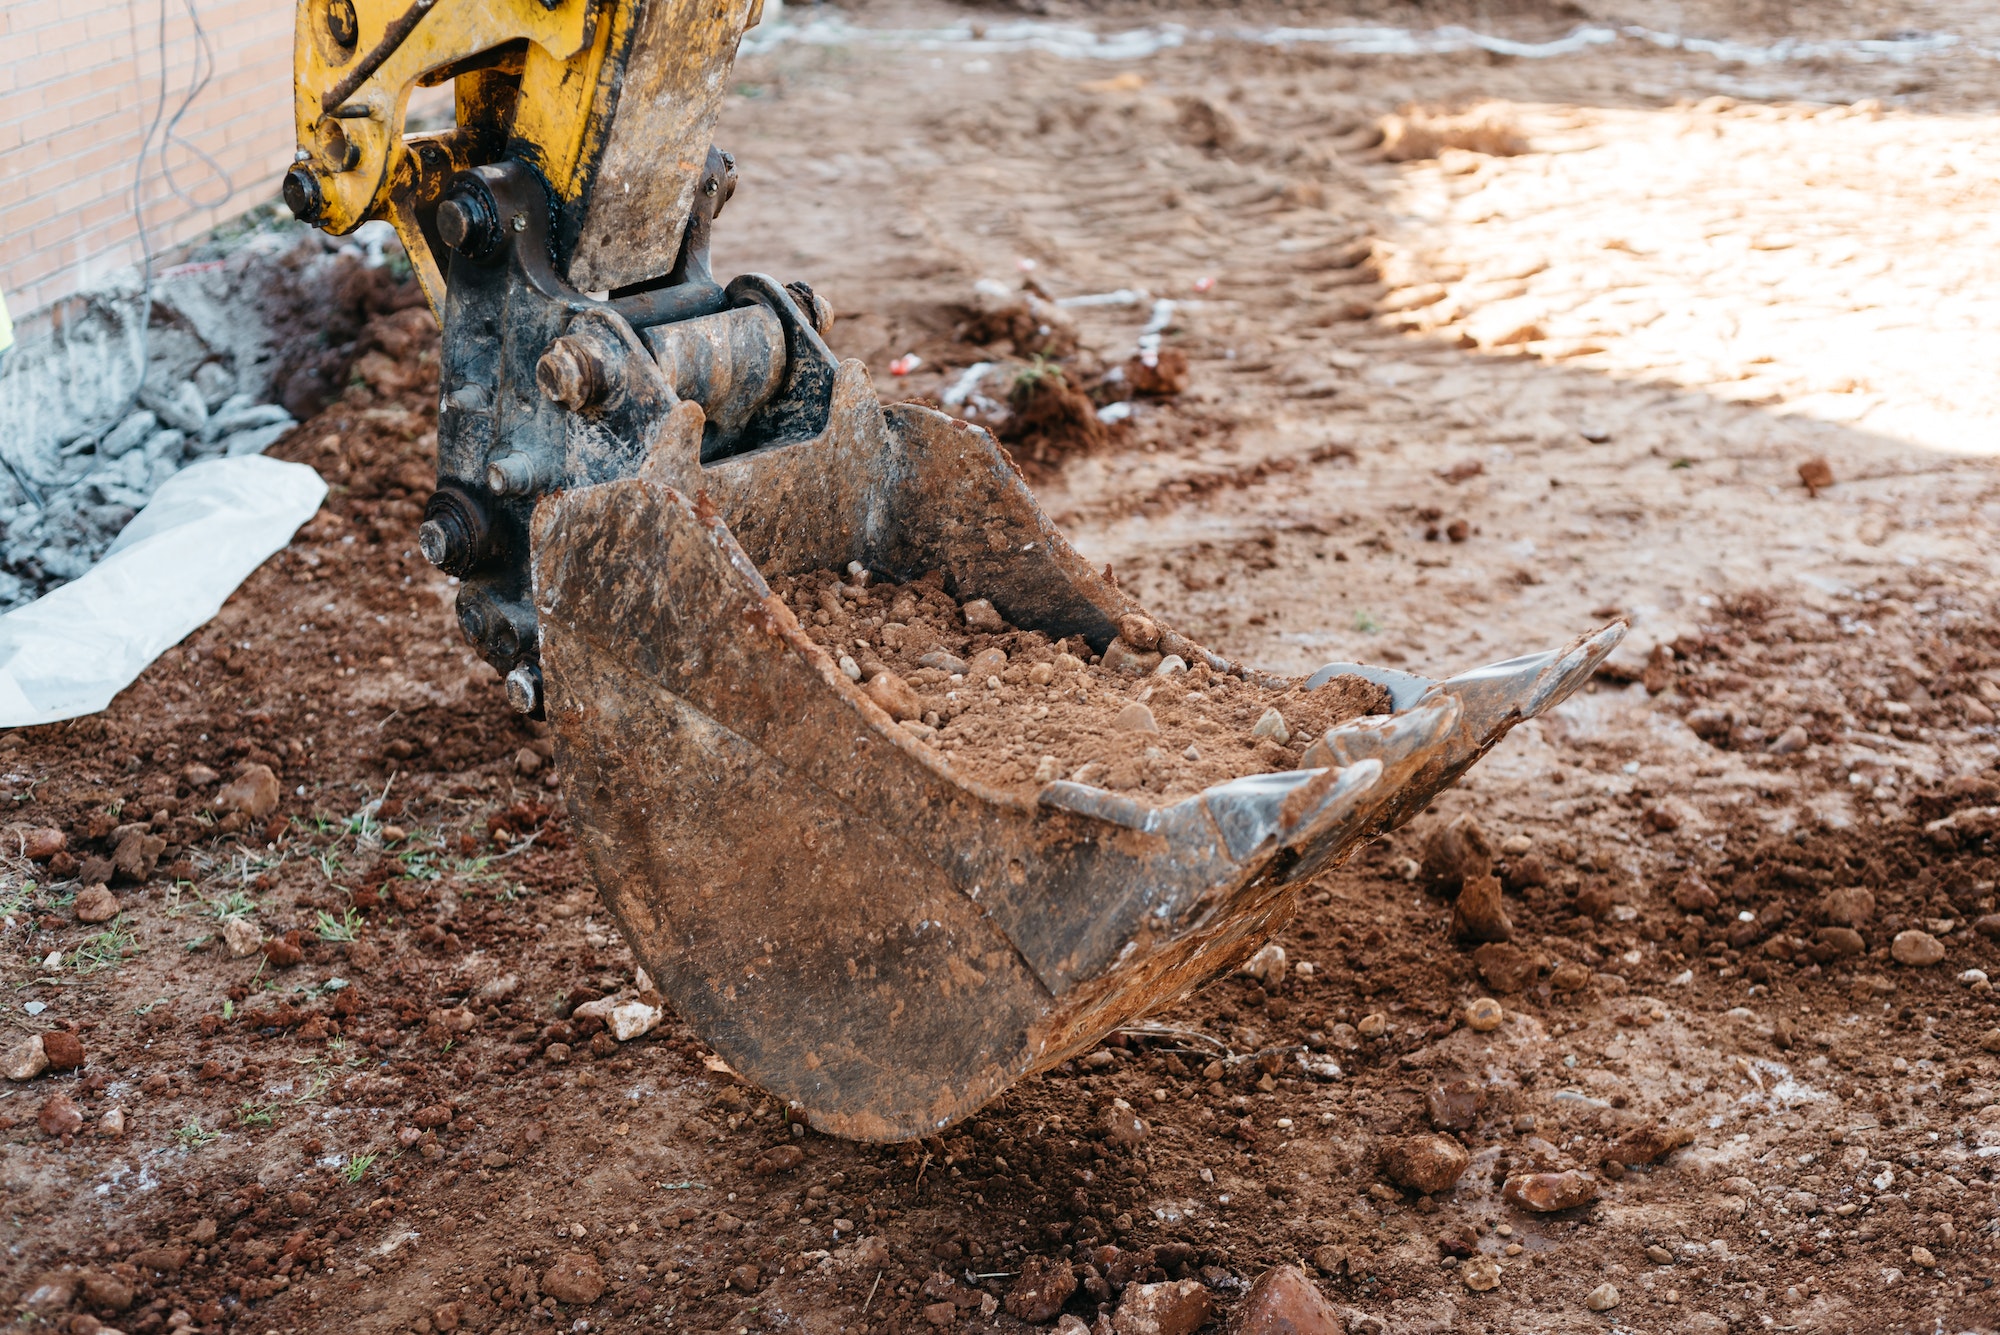 Shovel machine on construction site with worker working with pneumatic hammer on background